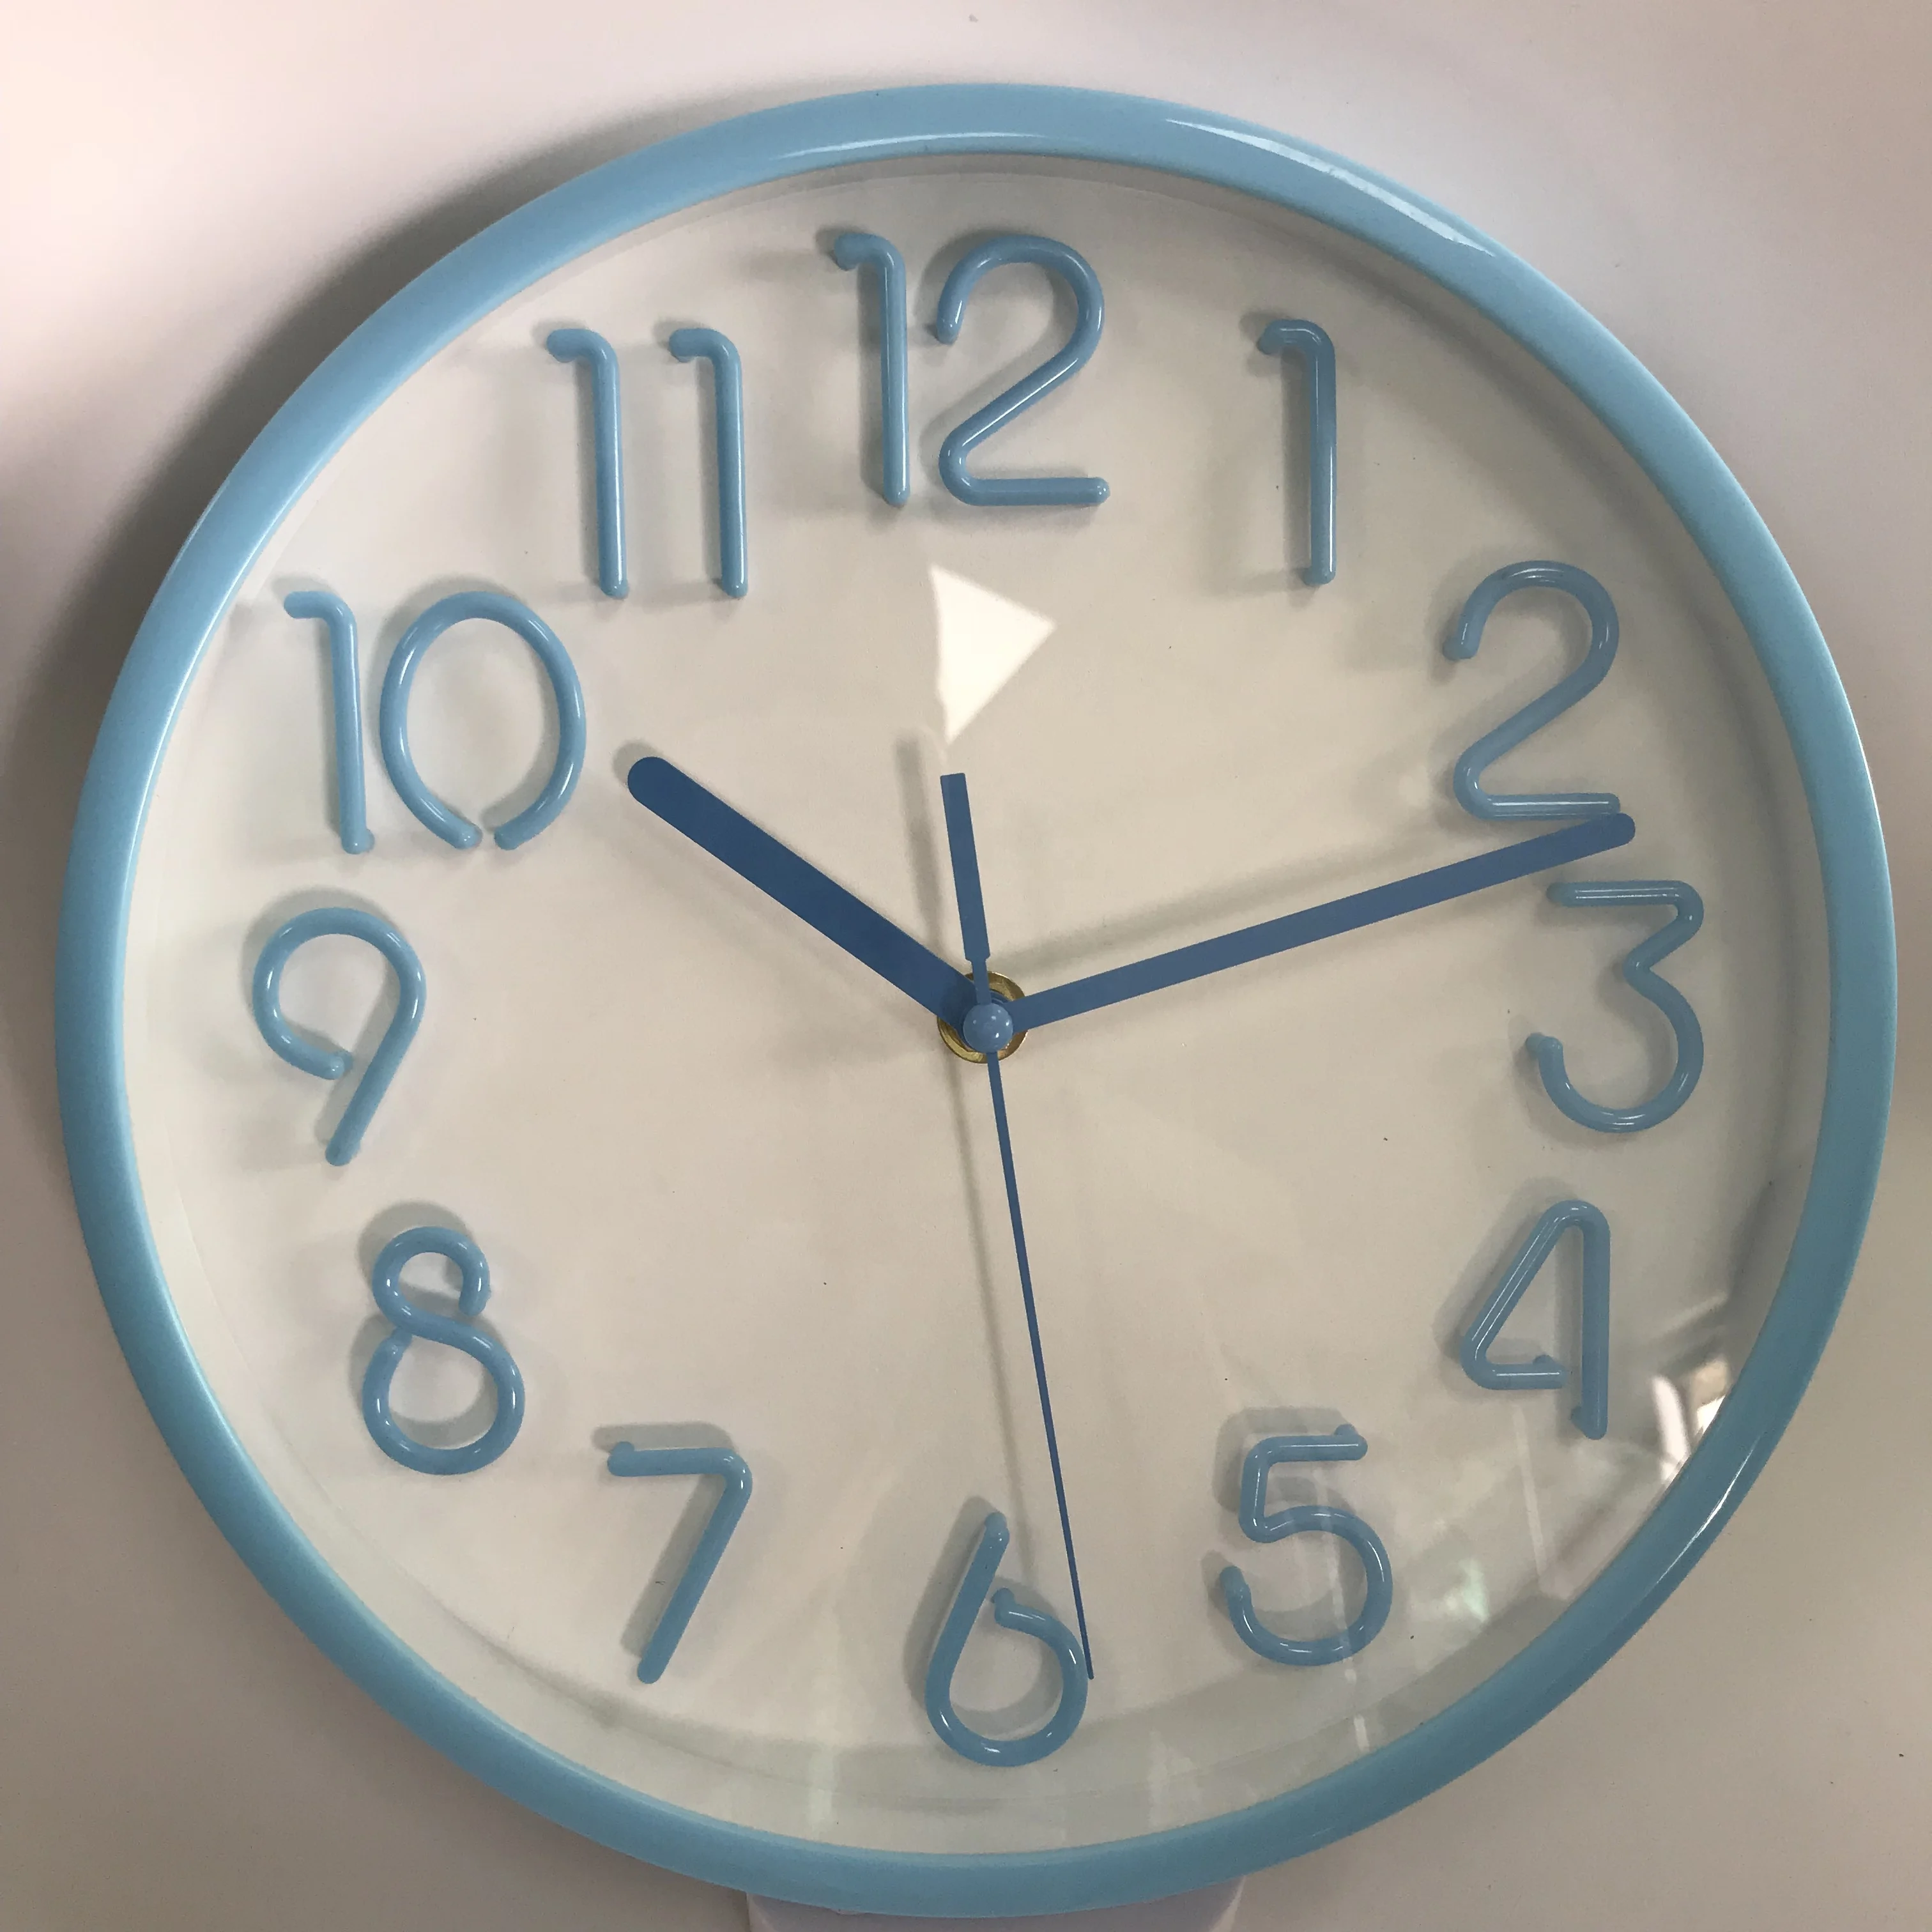 10/12 inch Plastic colorful wall clock with raised numbers